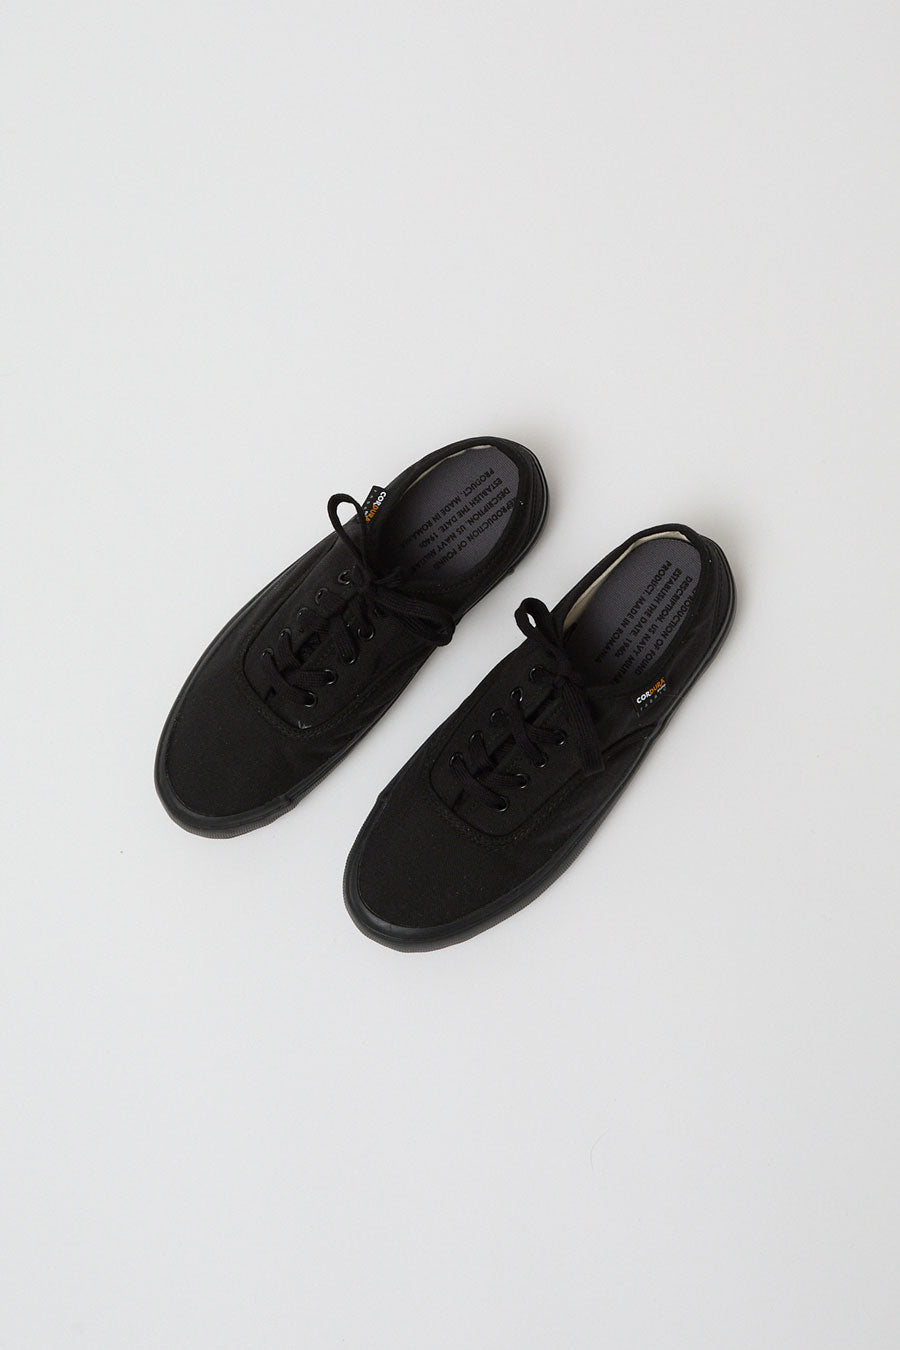 Reproduction of Found 5851 Trainer in Black